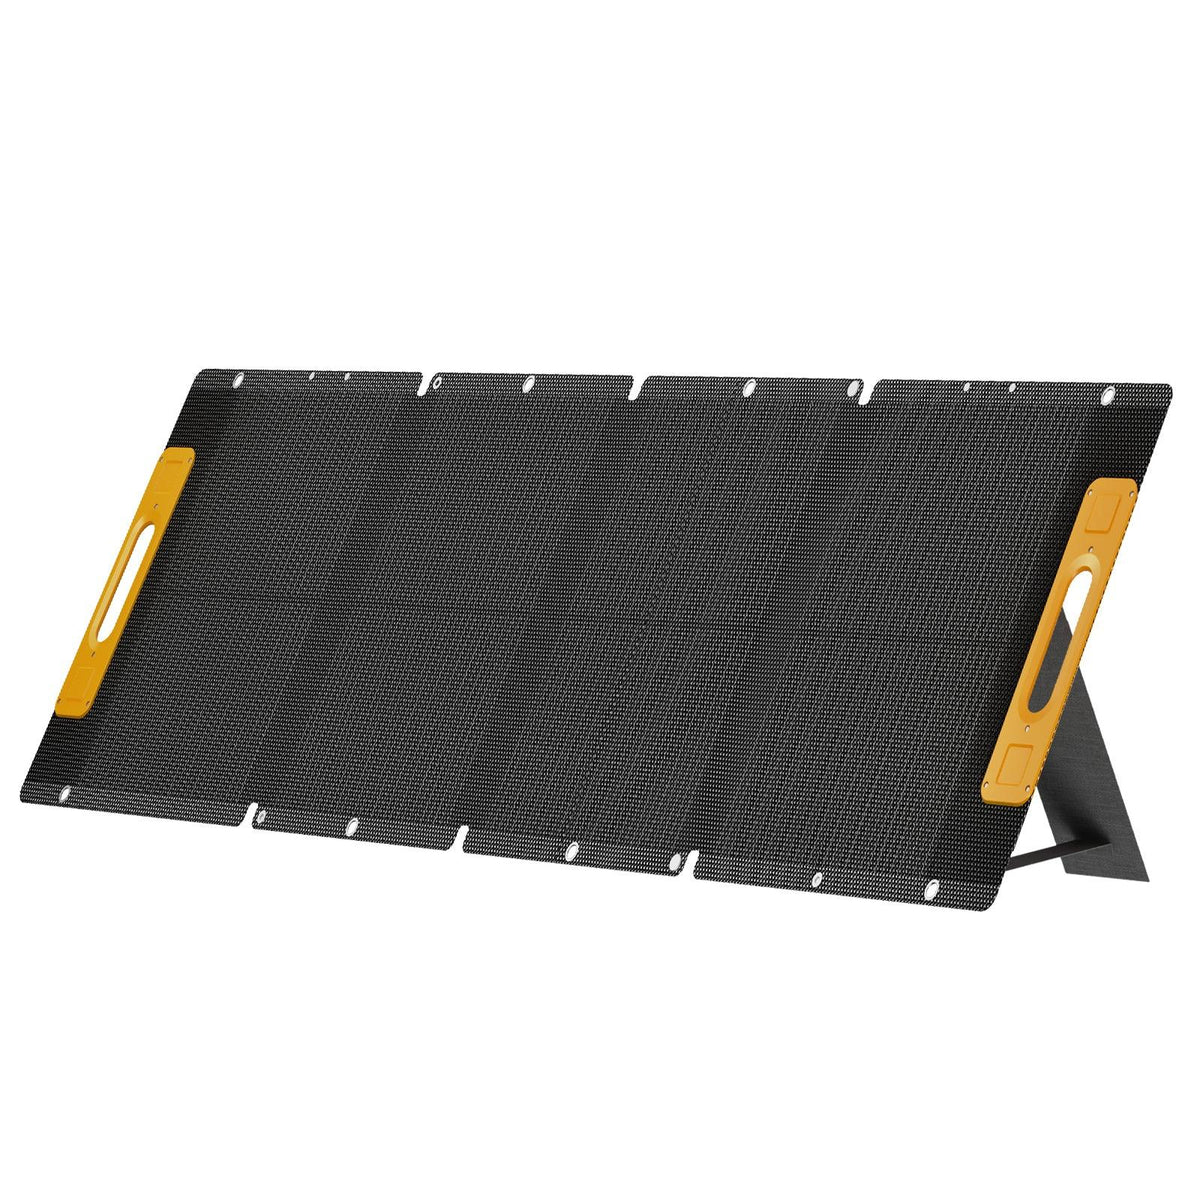 Newsmy 120W Portable Solar Panel 6-in-1 adapter IP65 for Portable Power Station